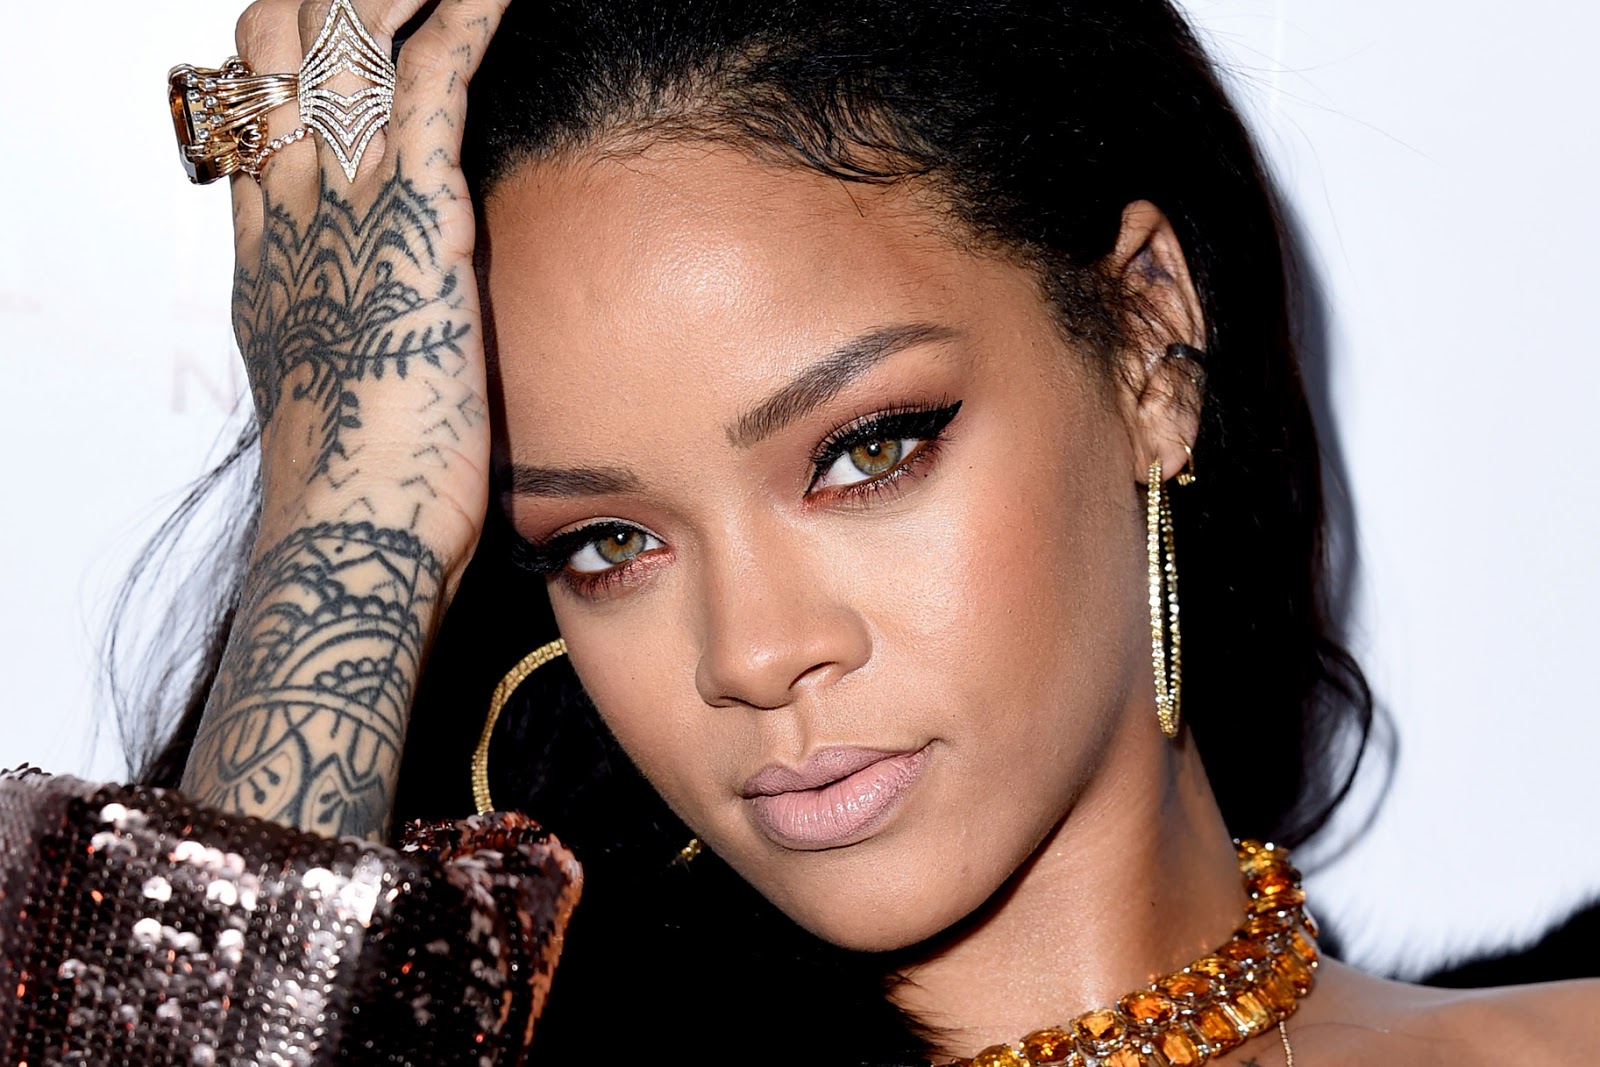 3. Rihanna's Breast Tattoo: The Evolution of Her Ink - wide 10